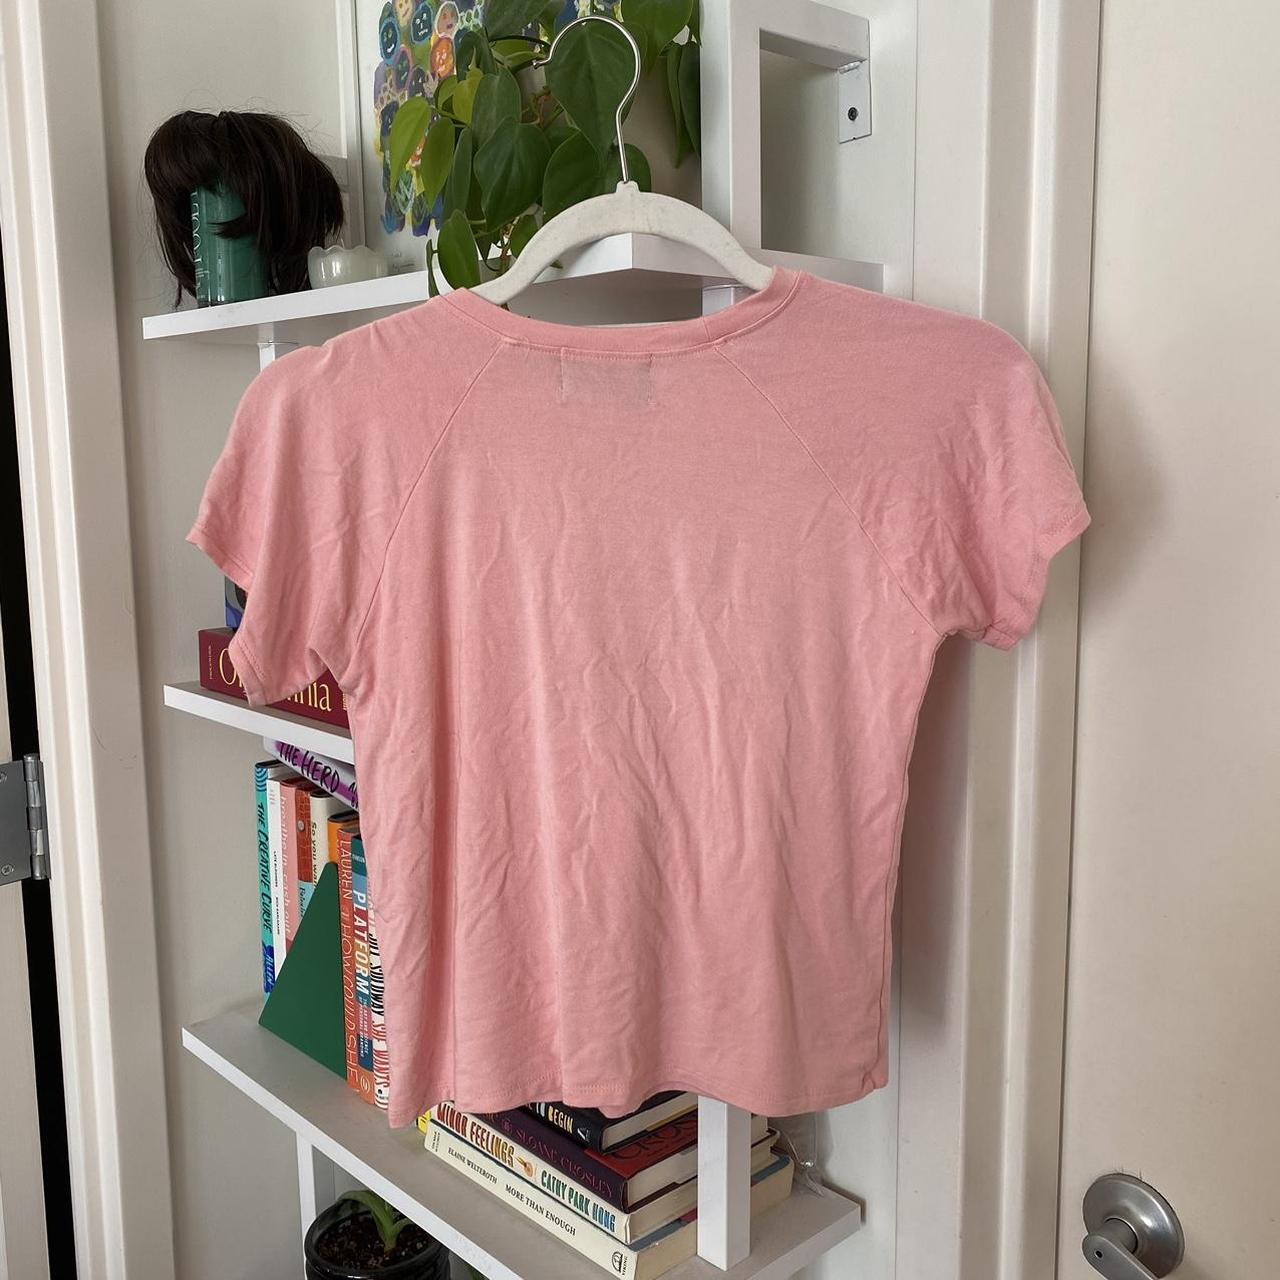 O-MIGHTY Women's Pink and Green T-shirt (3)